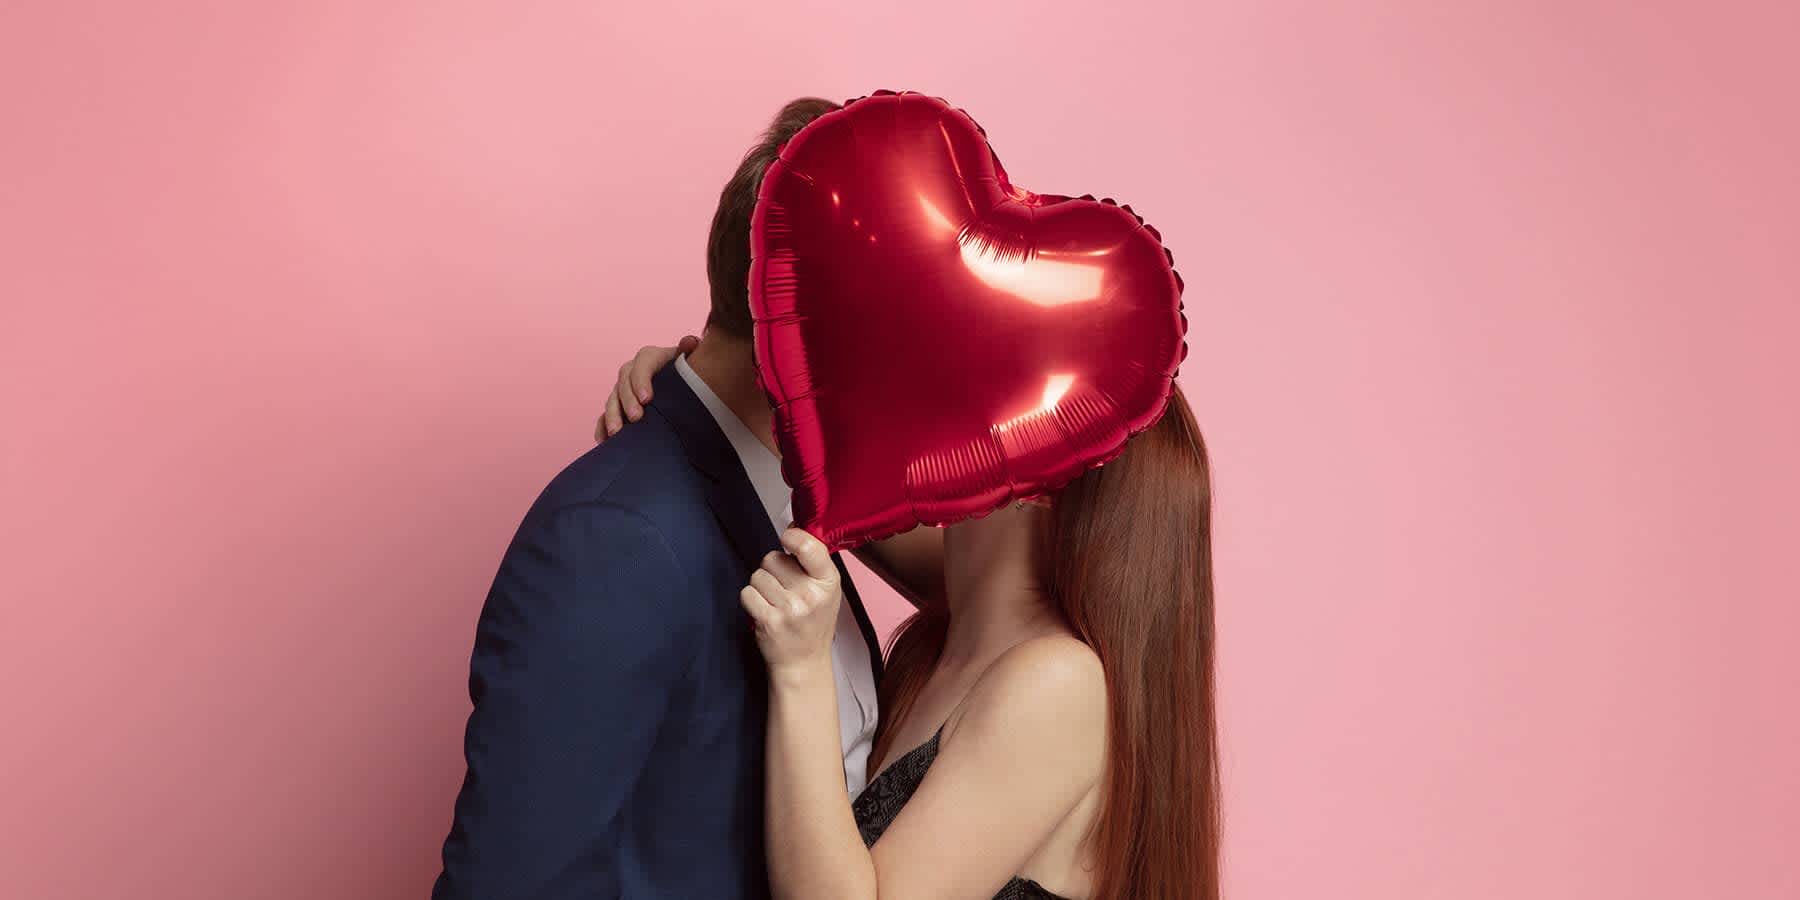 Young couple holding valentine-shaped balloon while kissing after using safe sex practices to avoid STDs